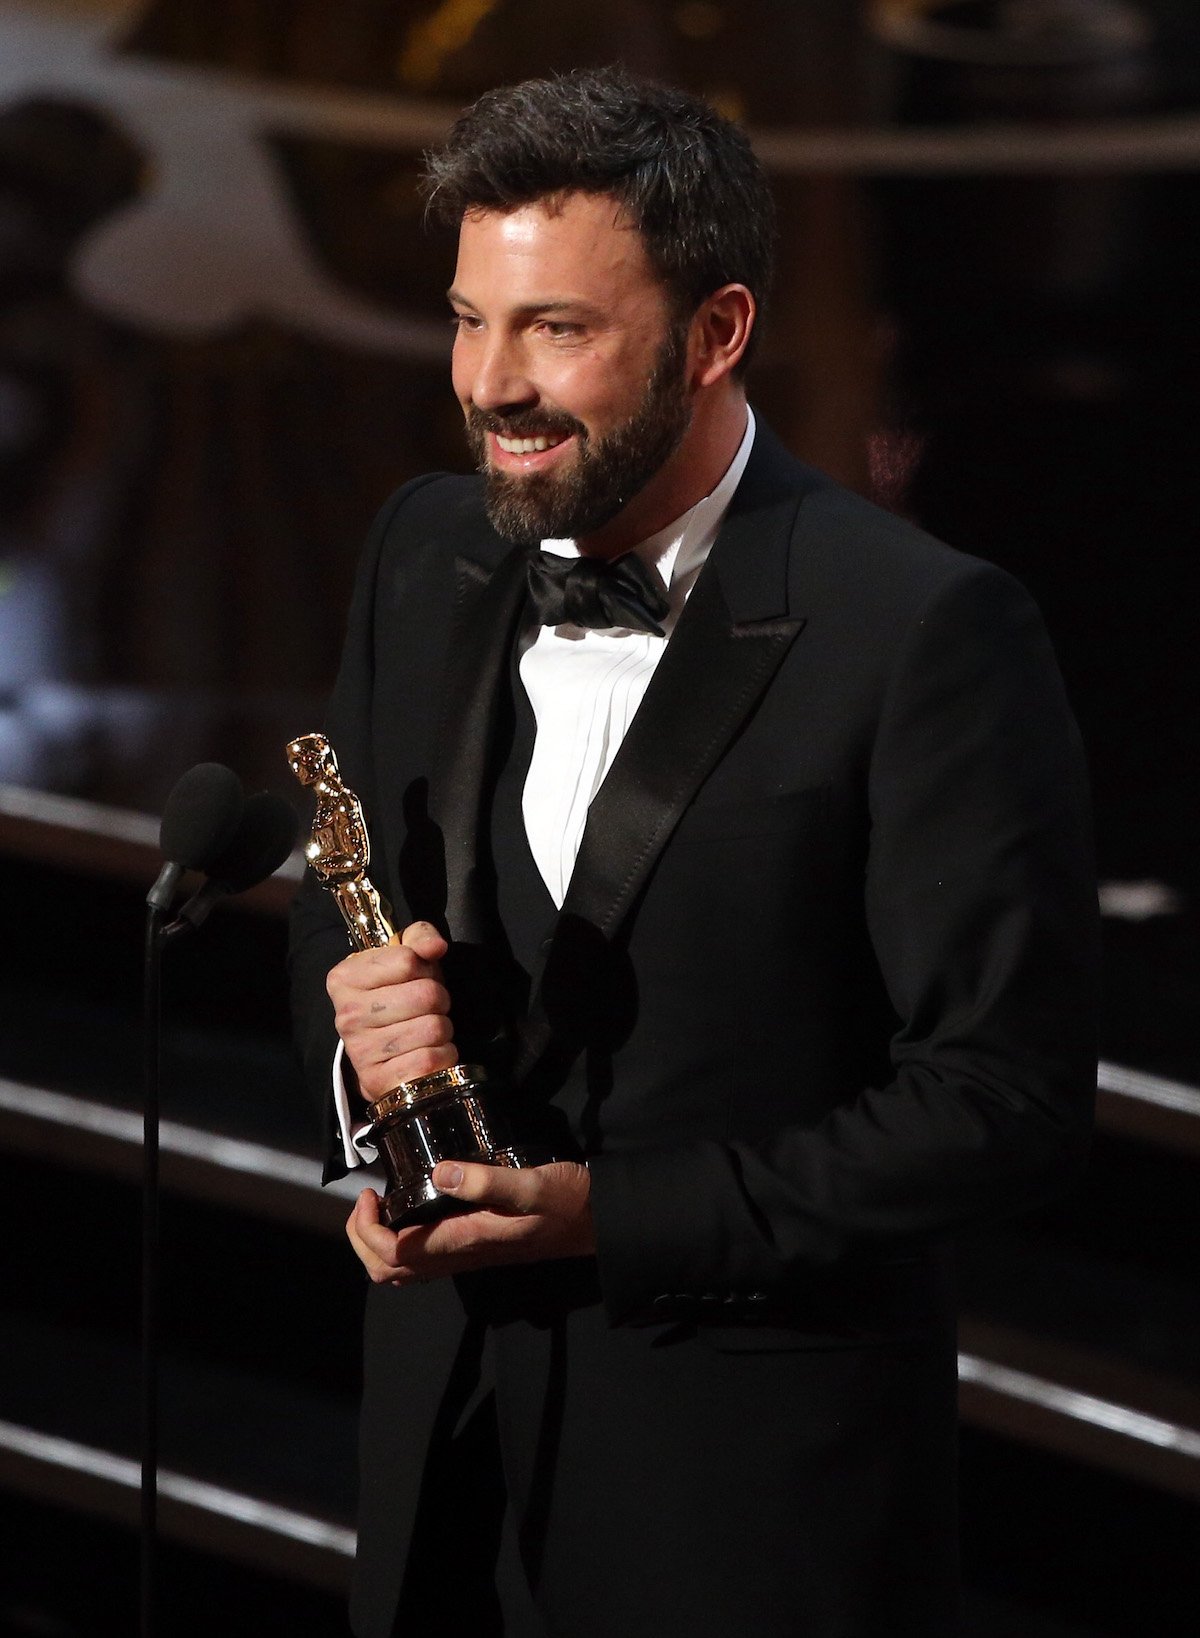 Ben Affleck smiles as he holds his Oscar onstage at the 2013 Academy Awards in a tuxedo